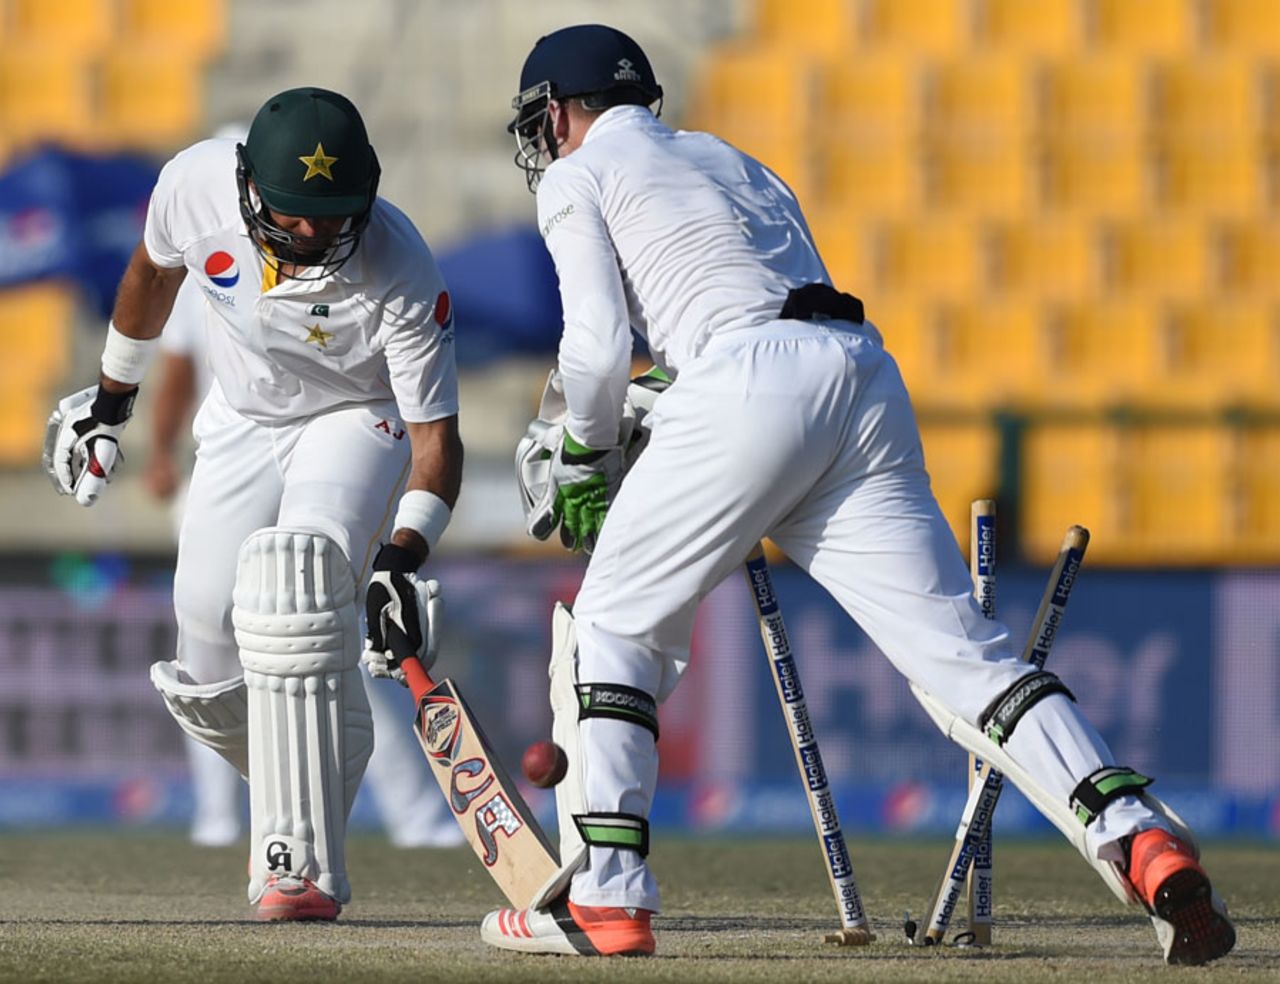 Misbah-ul-Haq was bowled trying to attack Moeen Ali, Pakistan v England, 1st Test, Abu Dhabi, 5th day, October 17, 2015